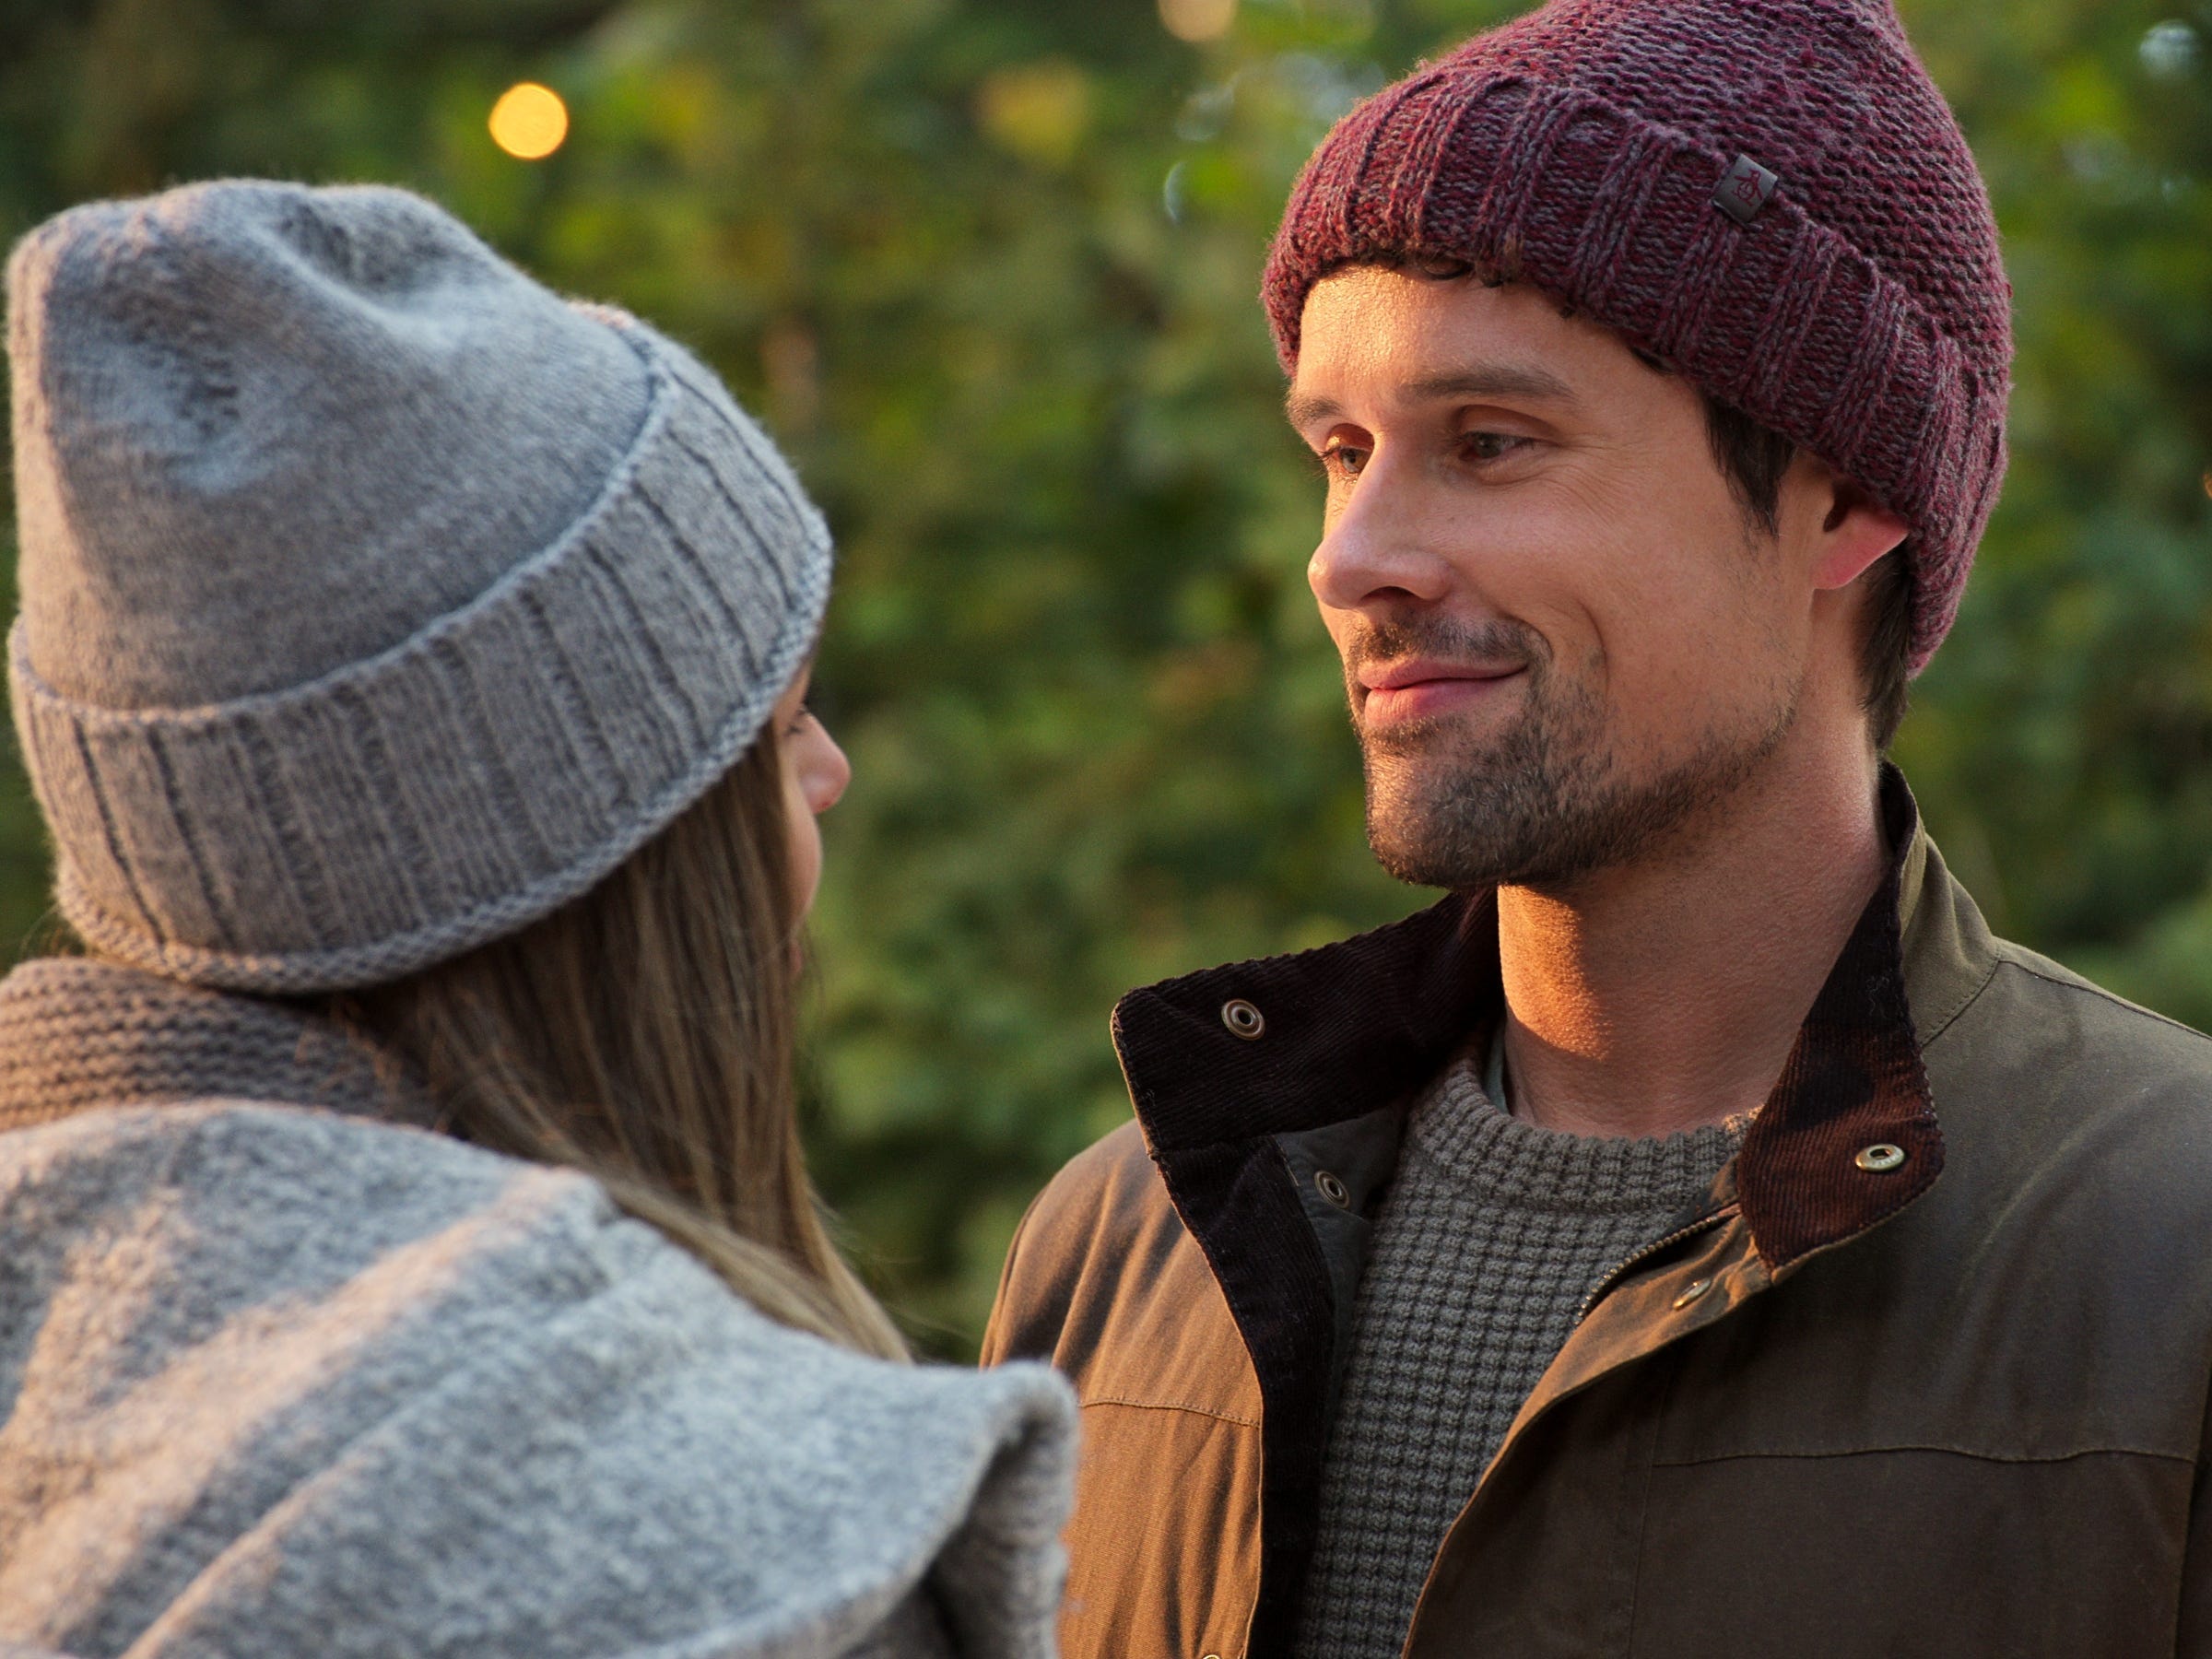 benjamin hollingsworth as brady in virgin river, wearing a red knit cap and smiling softly at a woman